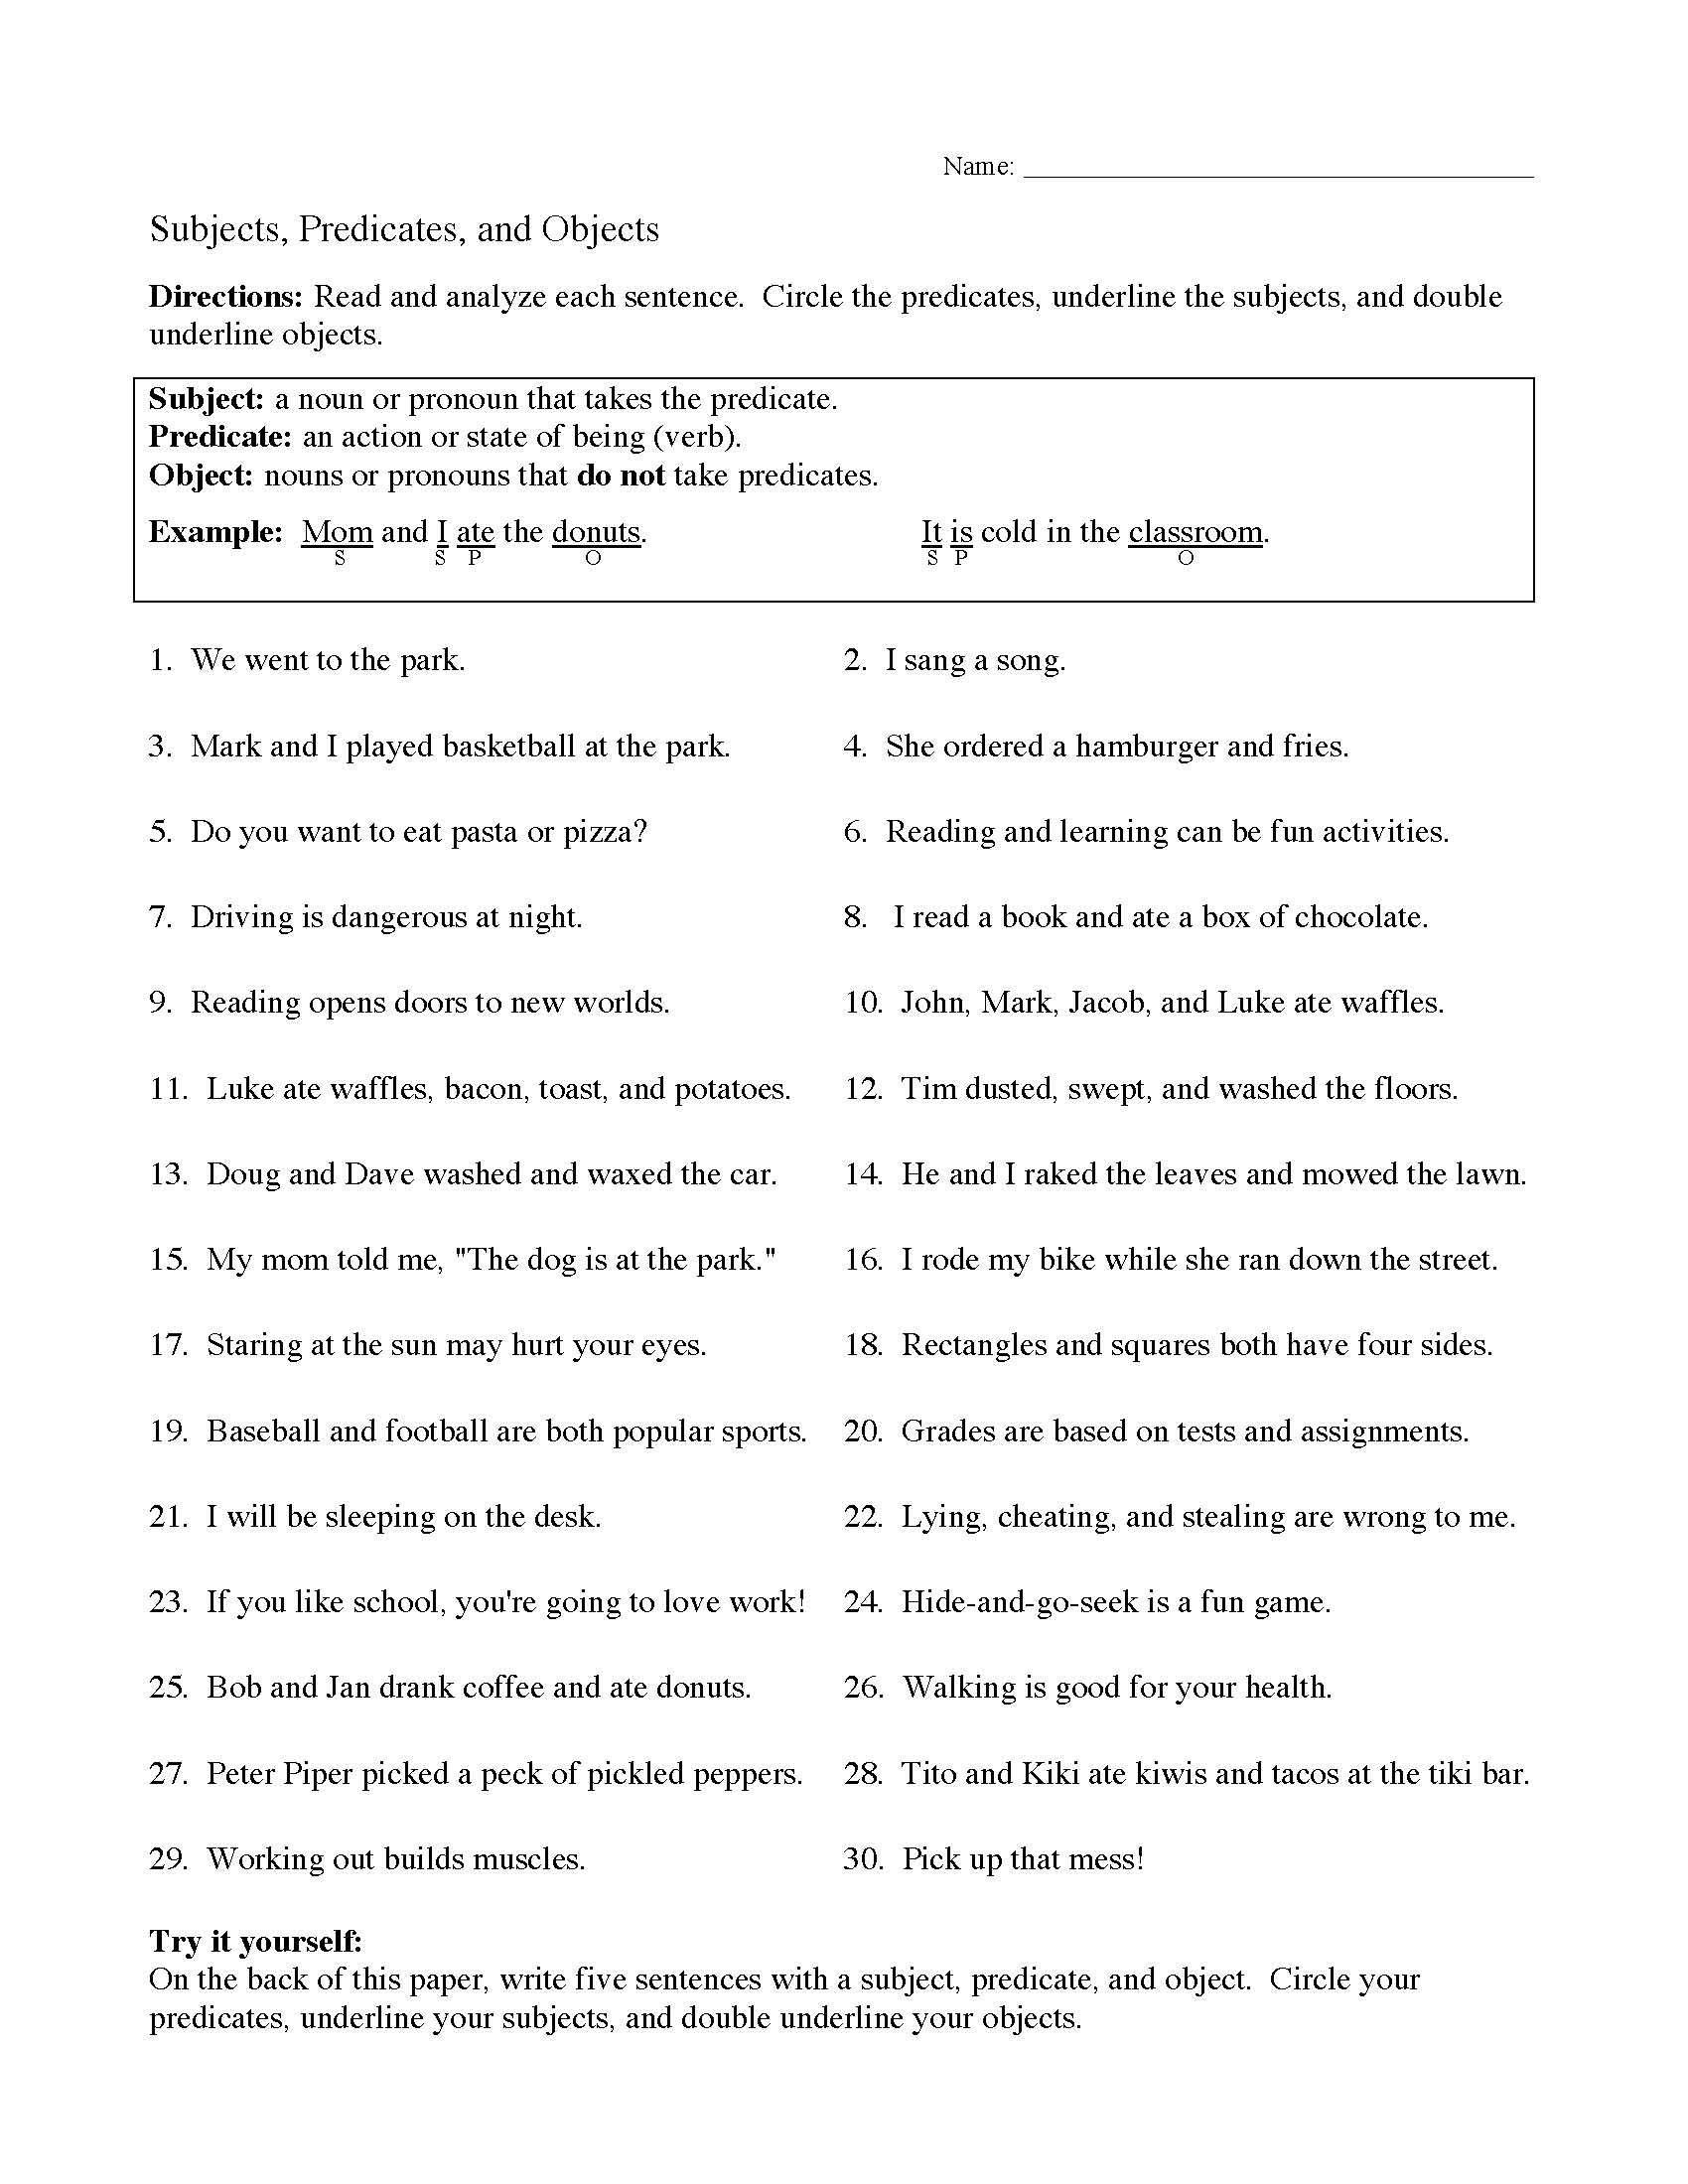 Subjects Predicates And Objects Worksheet Sentence Structure Activity